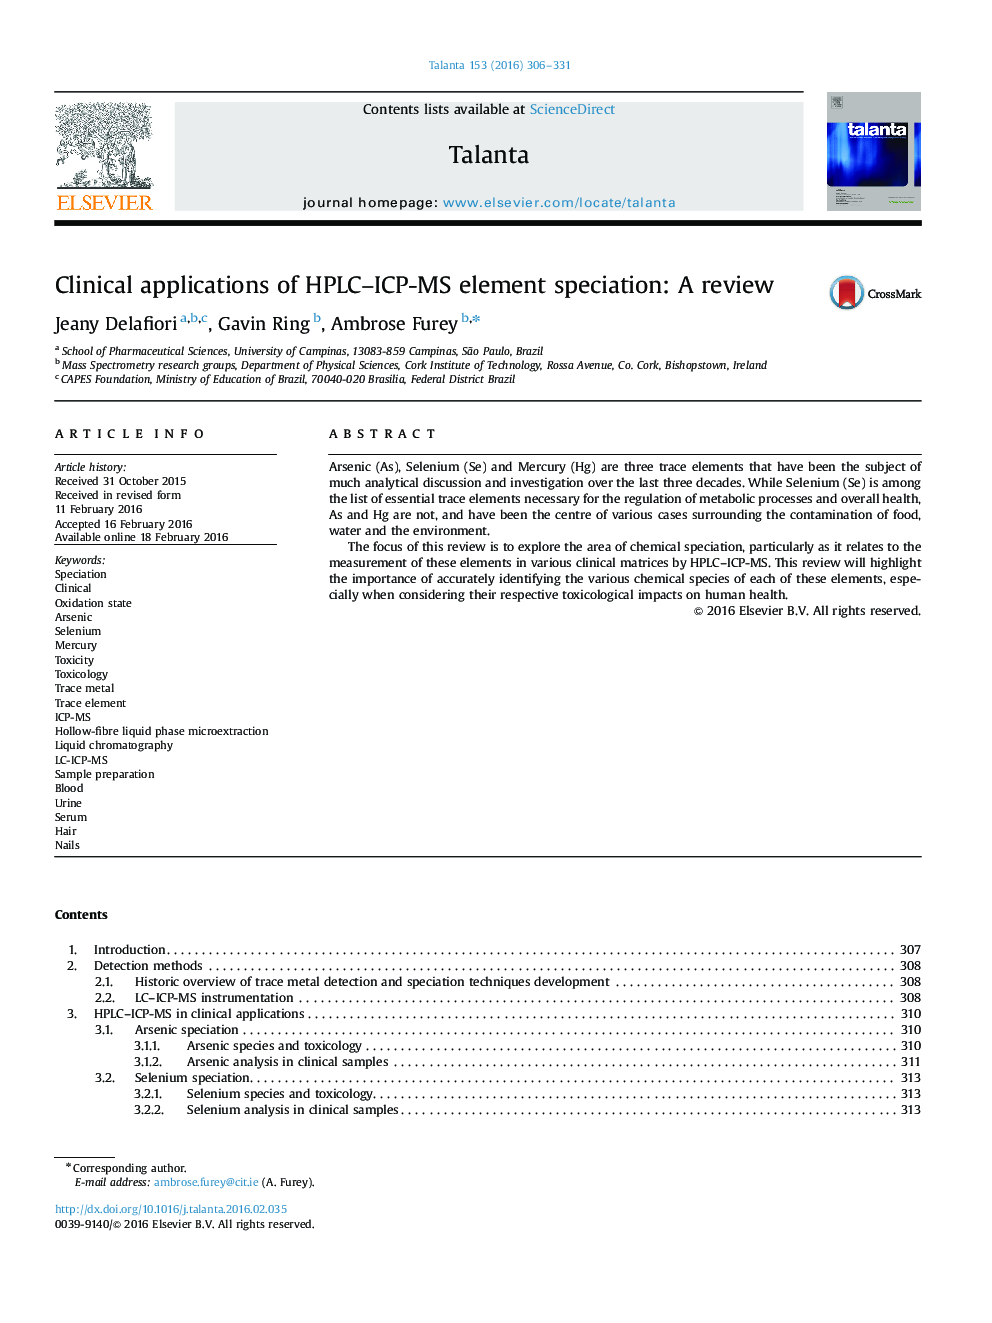 Clinical applications of HPLC–ICP-MS element speciation: A review